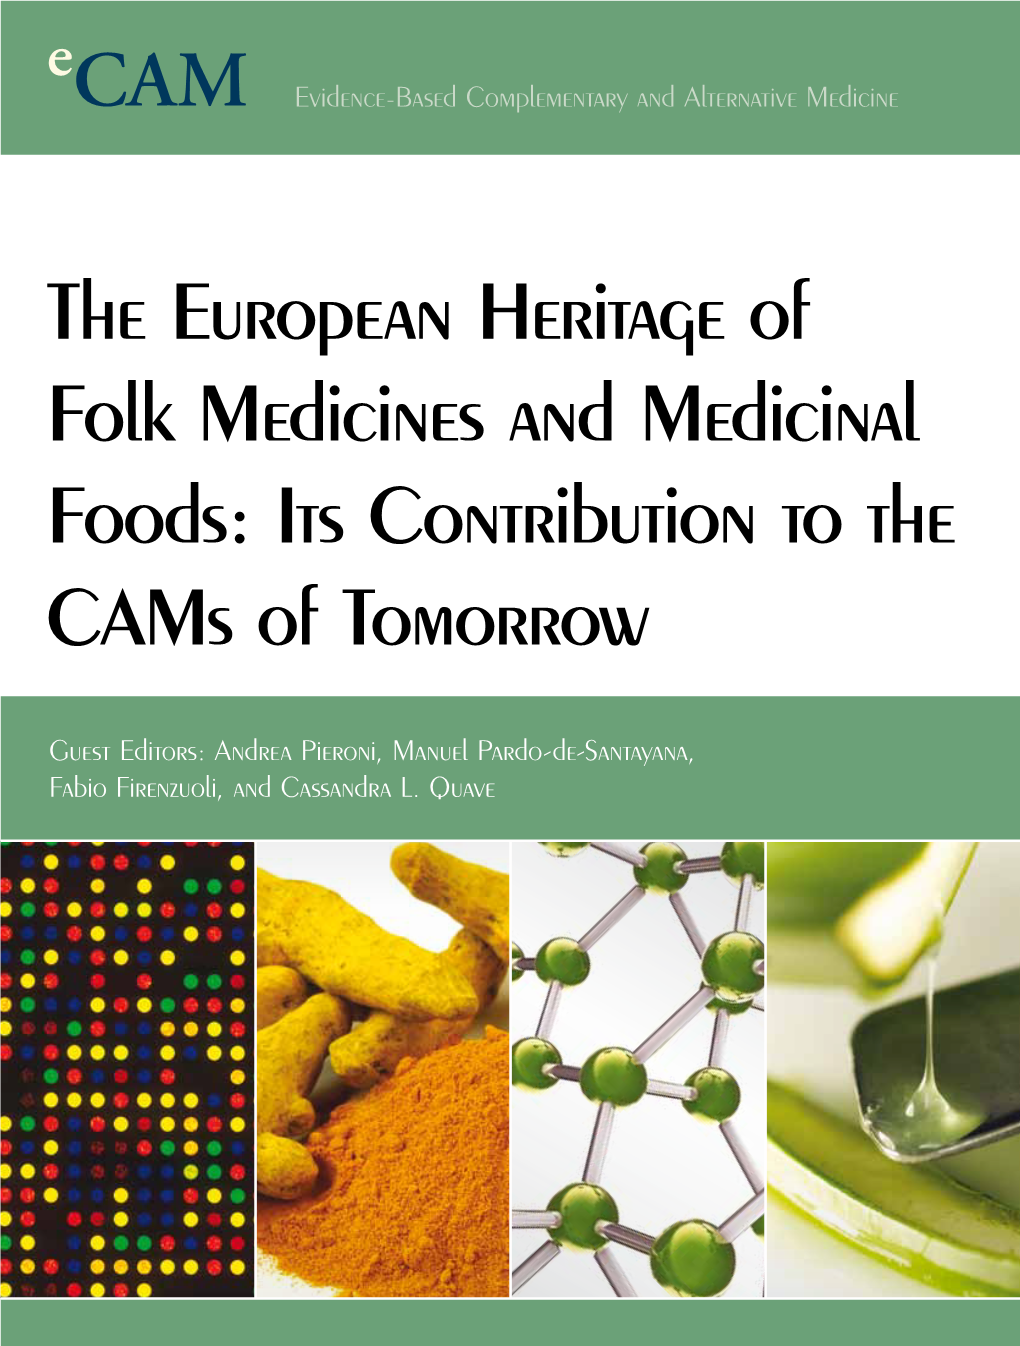 The European Heritage of Folk Medicines and Medicinal Foods: Its Contribution to the Cams of Tomorrow